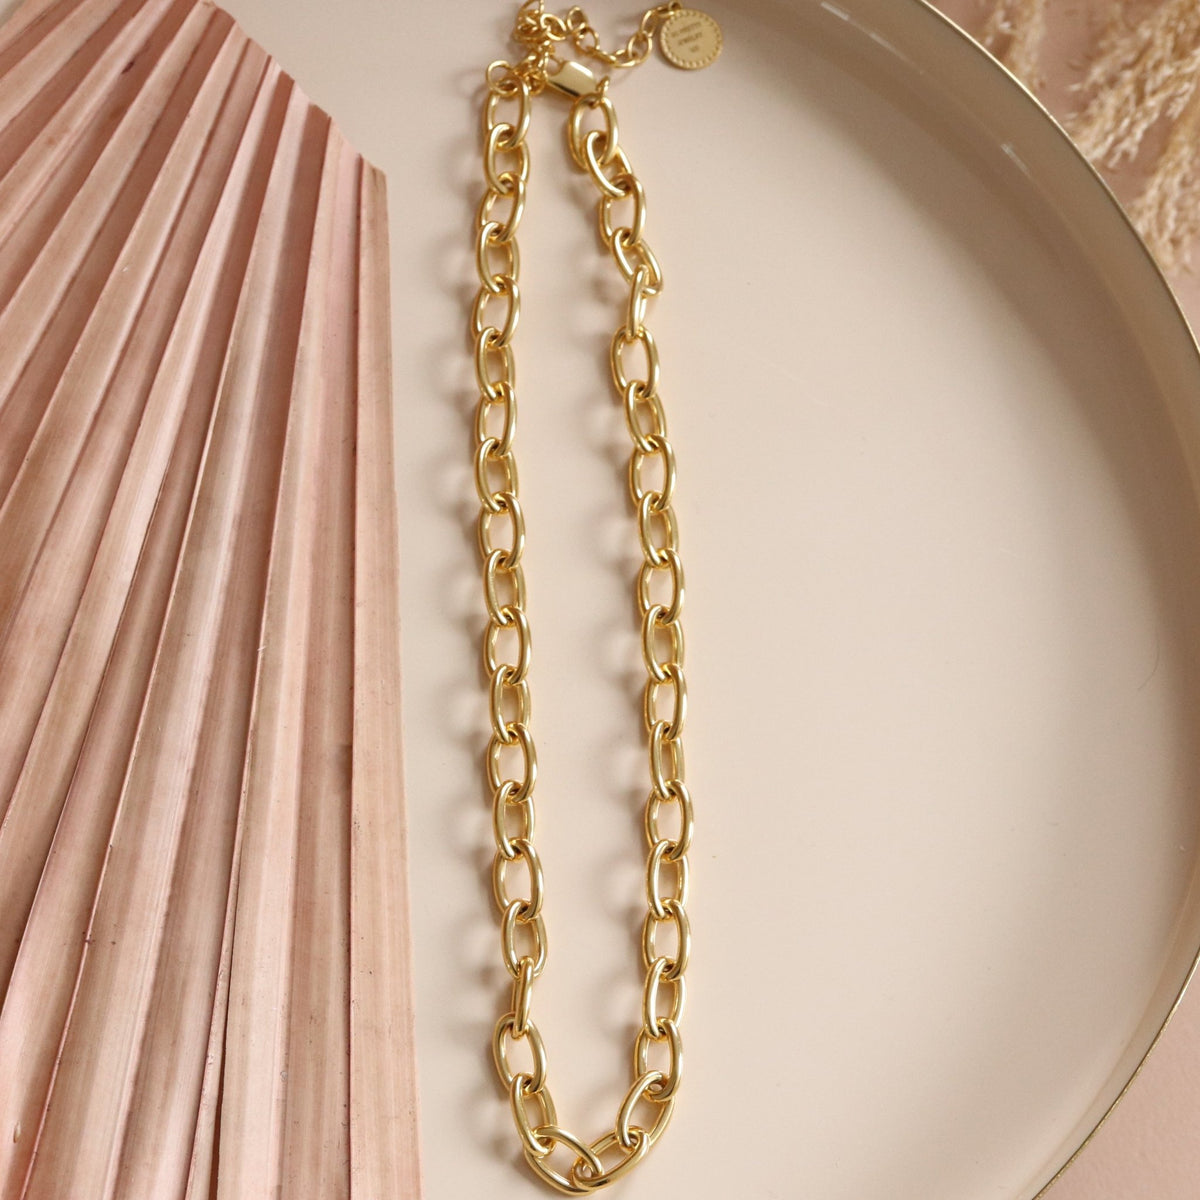 POISE HEAVY OVAL LINK NECKLACE - GOLD 15-18” - SO PRETTY CARA COTTER